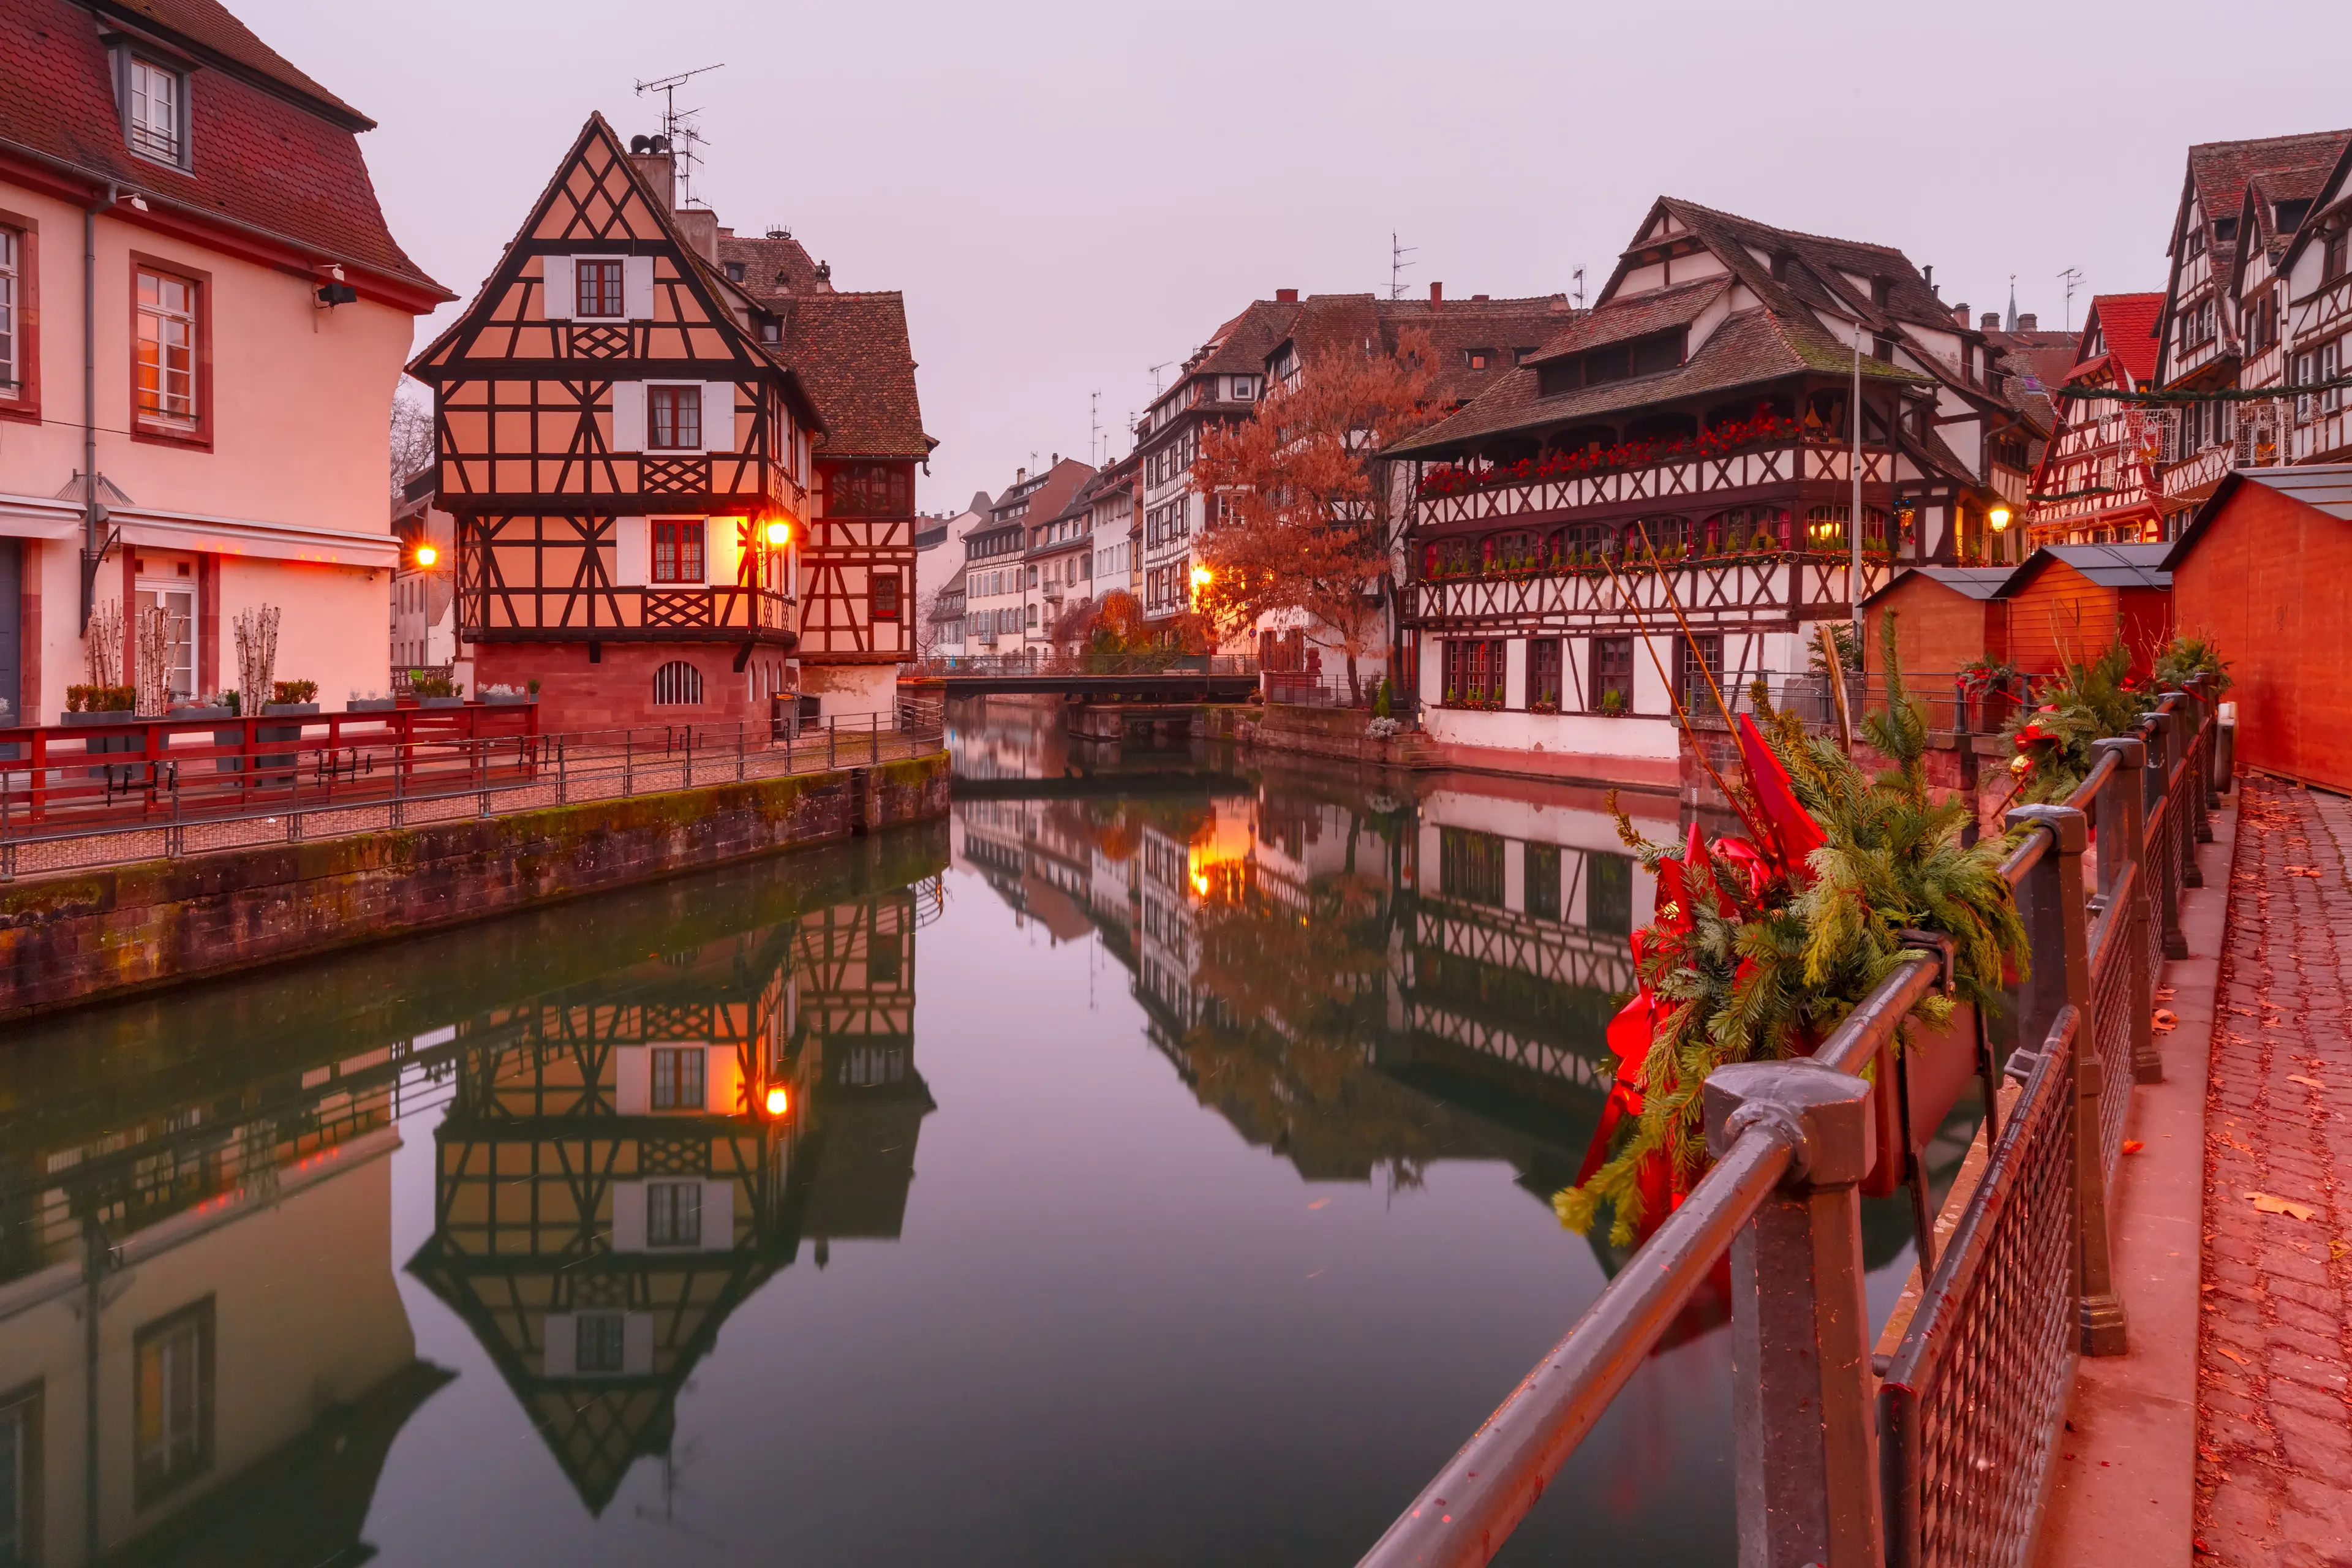 3-Day Family Christmas Holiday Itinerary in Strasbourg, France